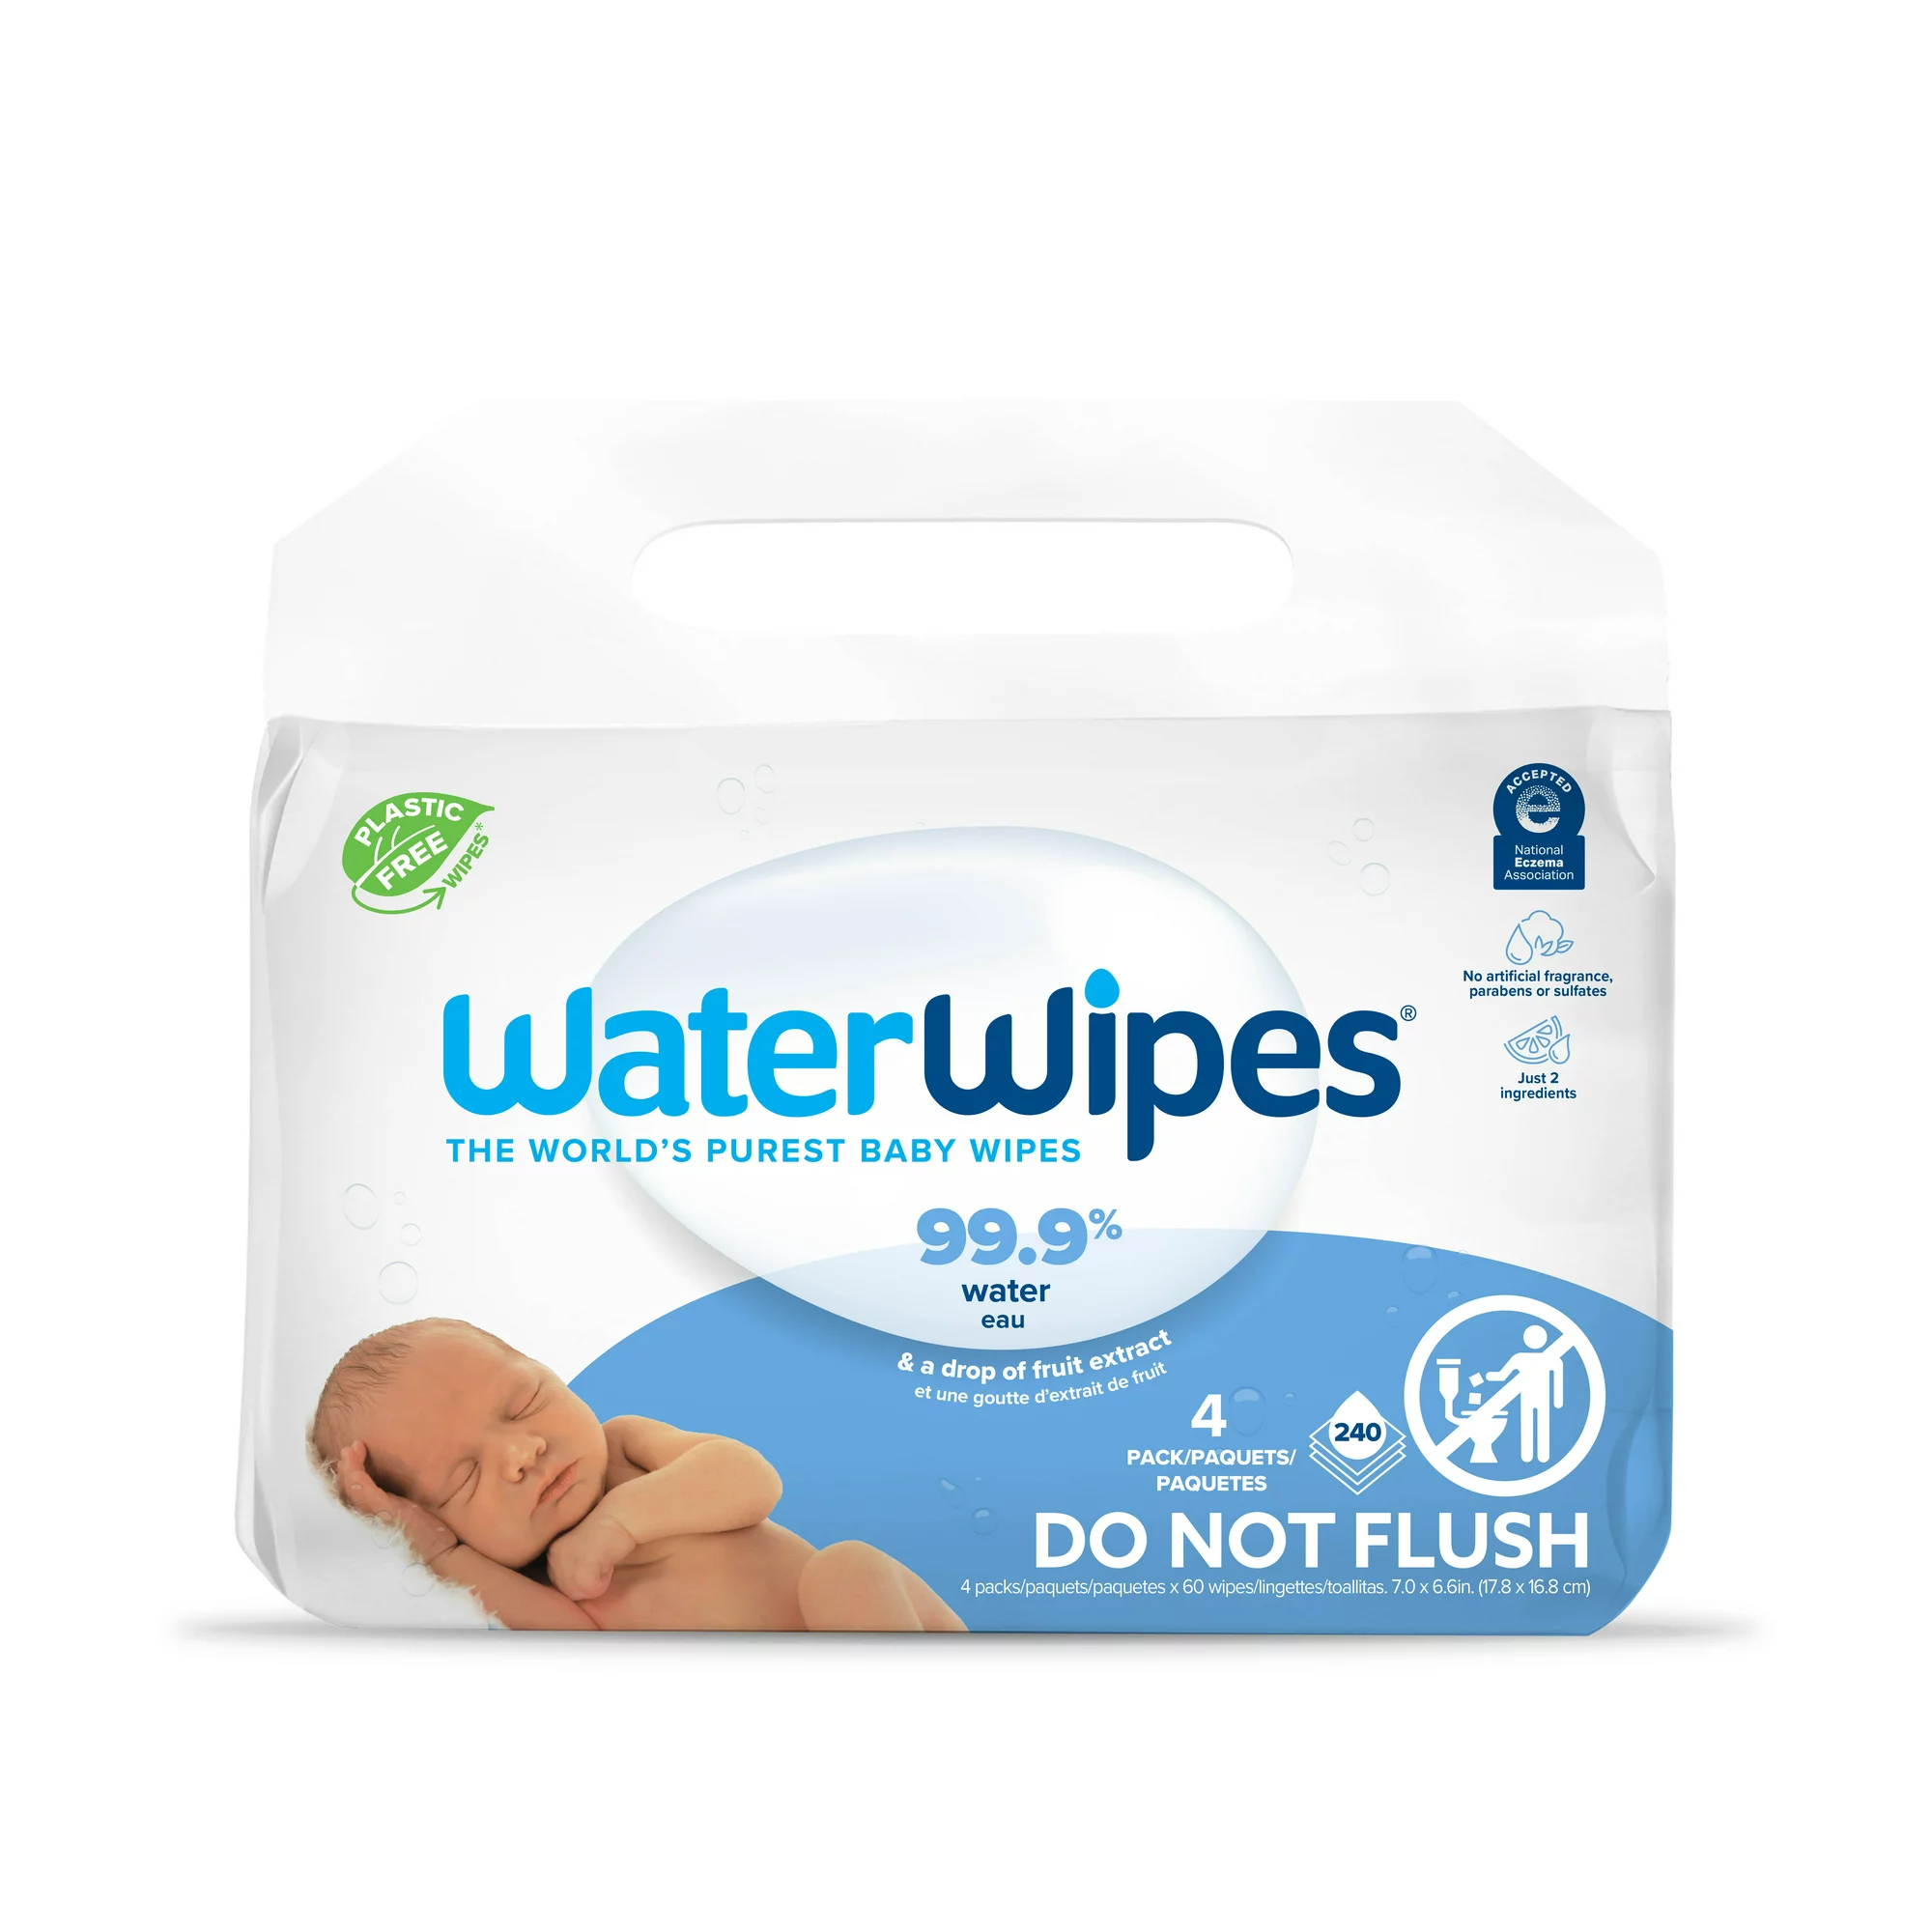  Gentle care for your little one with WaterWipes.